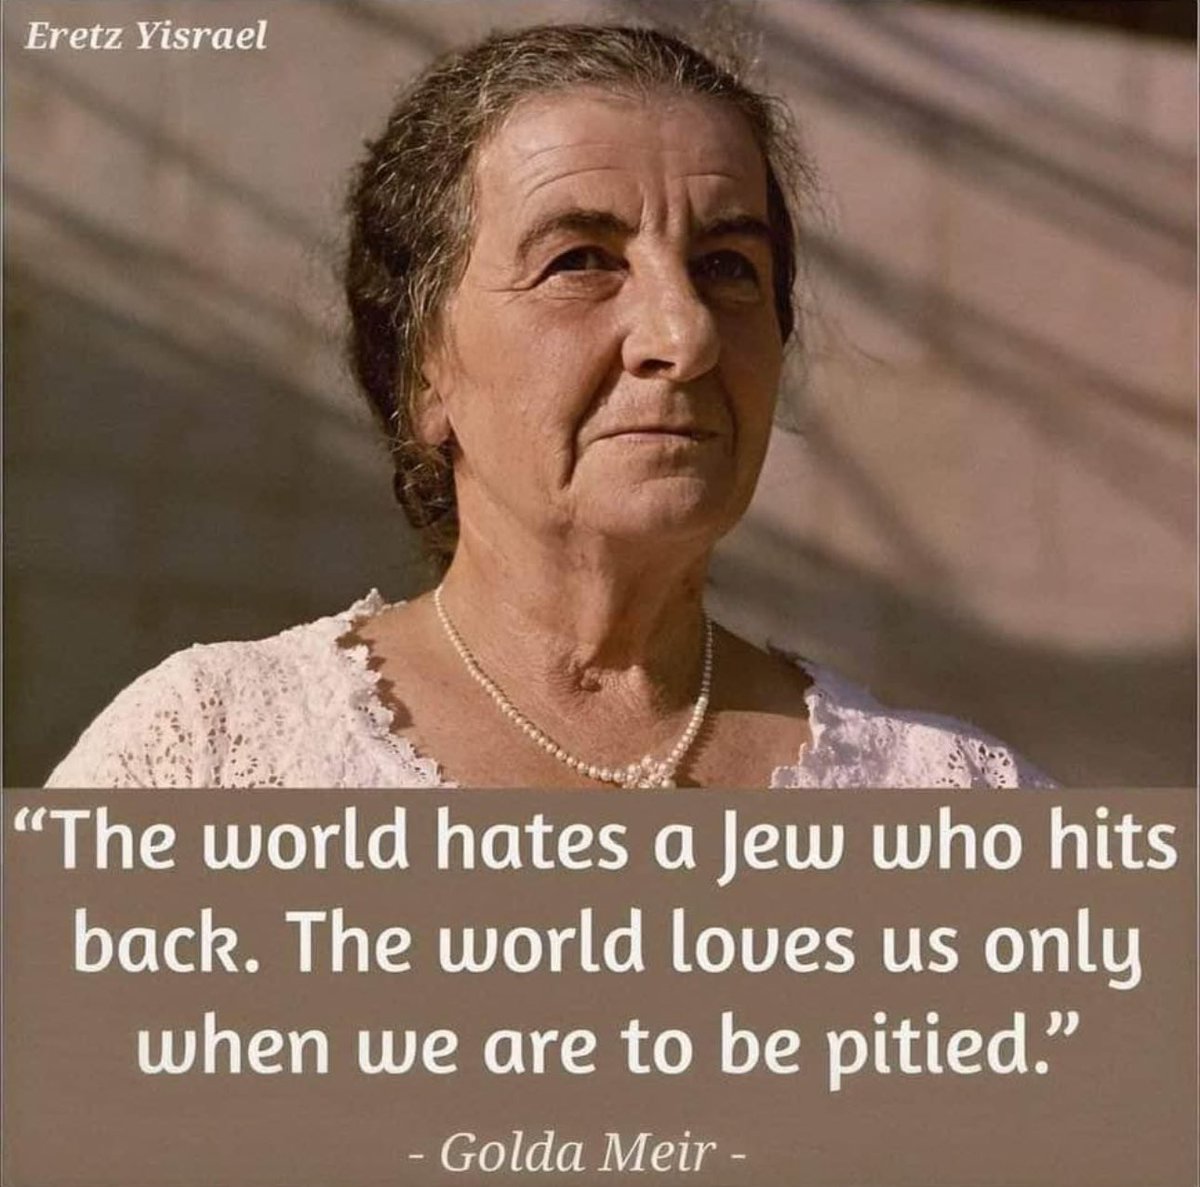 Understand this, understand everything (though not clear now the world loves Jews even when they are to be pitied).